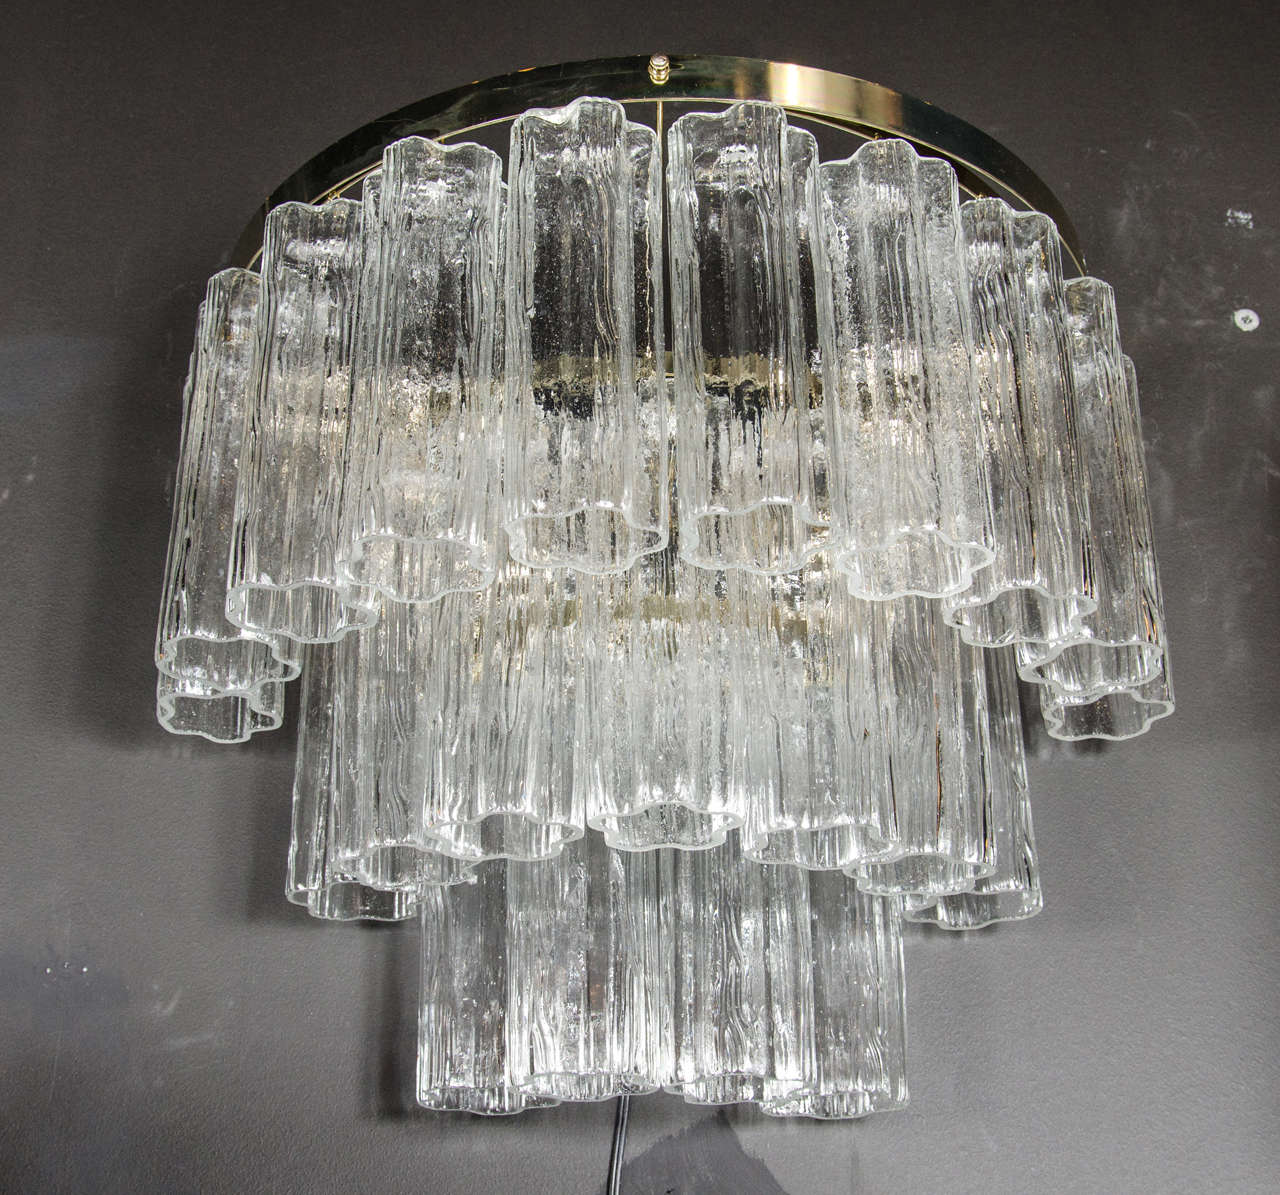 Pair of Mid-Century modernist three-tier tronchi sconces. These sconces feature three tiers of handblown Murano glass tronchi shades that are individually hung from their half-circular brass frames. The top-tier supports ten tronchi glass shades as